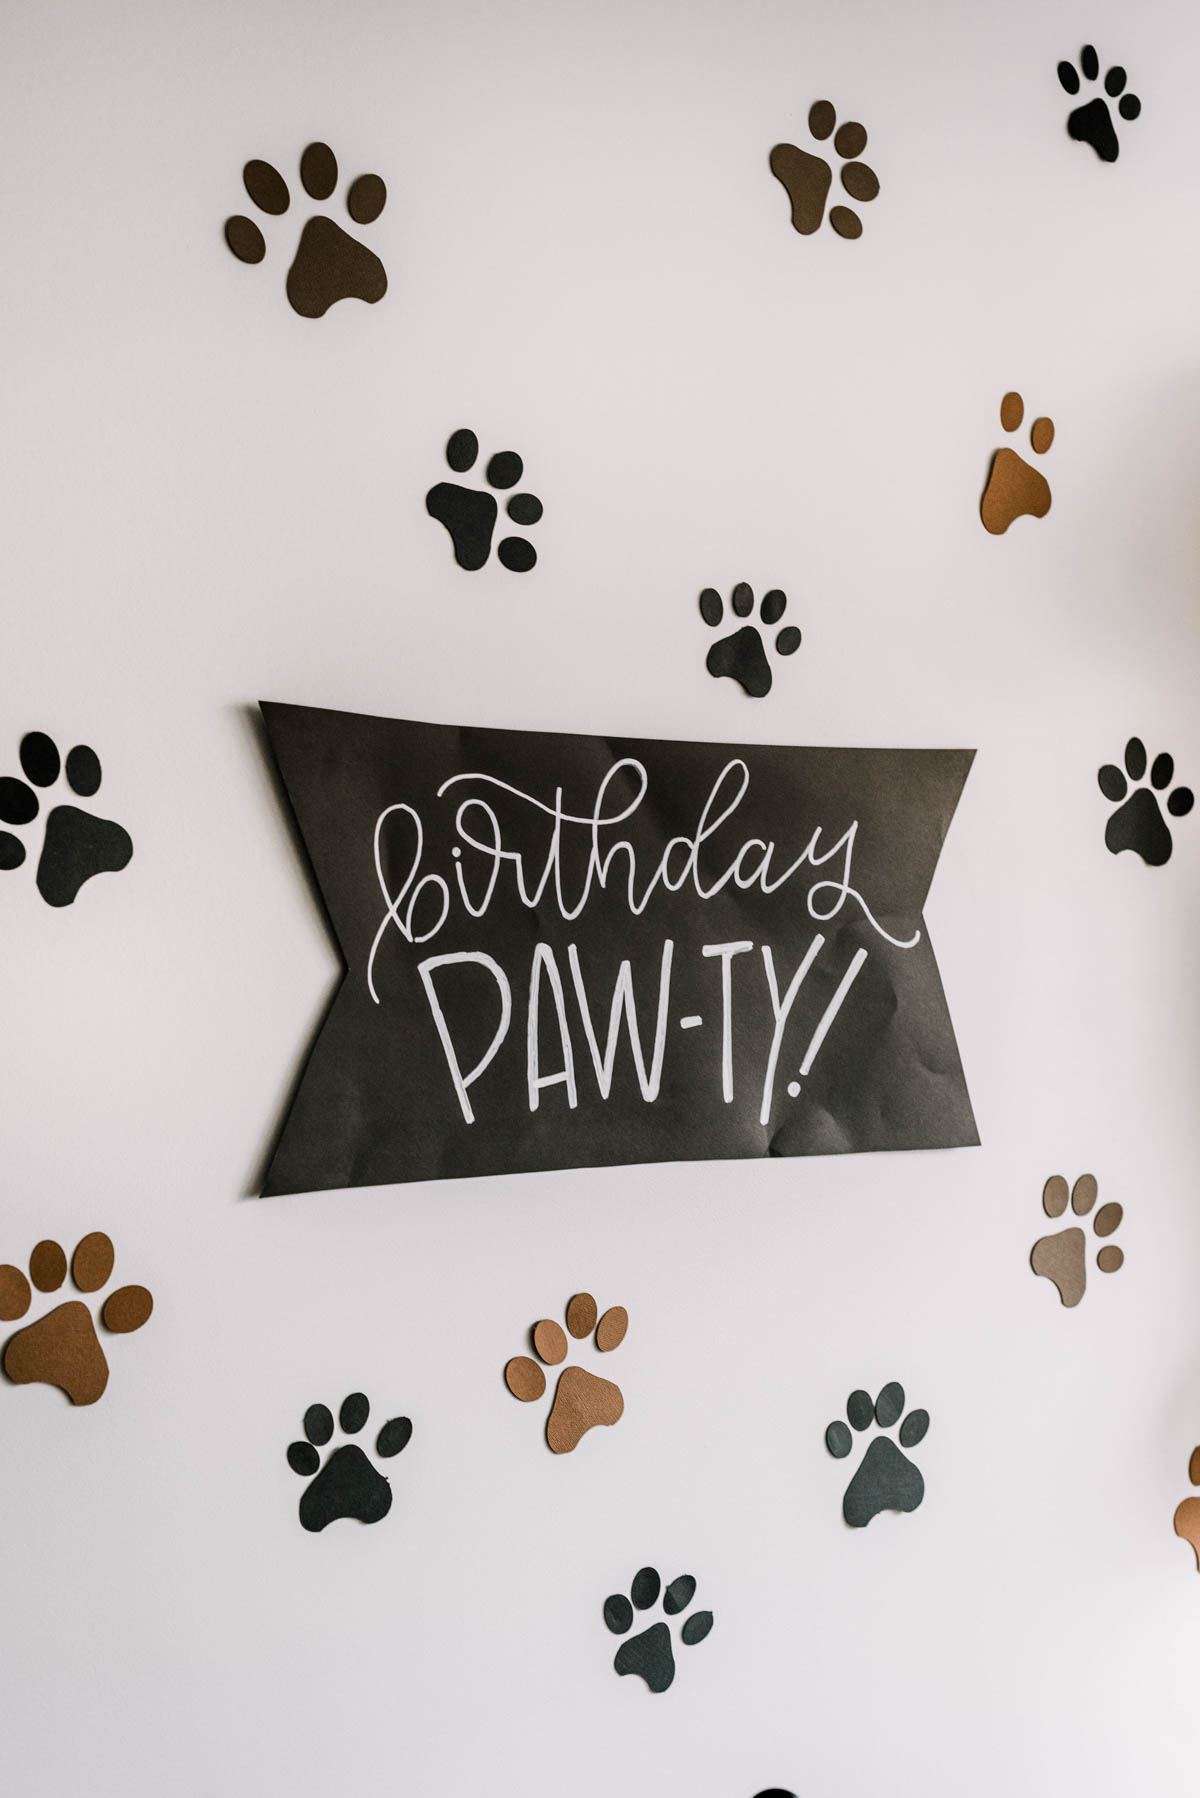 Puppy themed party decor- black poster board sign reads birthday 'paw-ty' surrounded by paw prints on wall